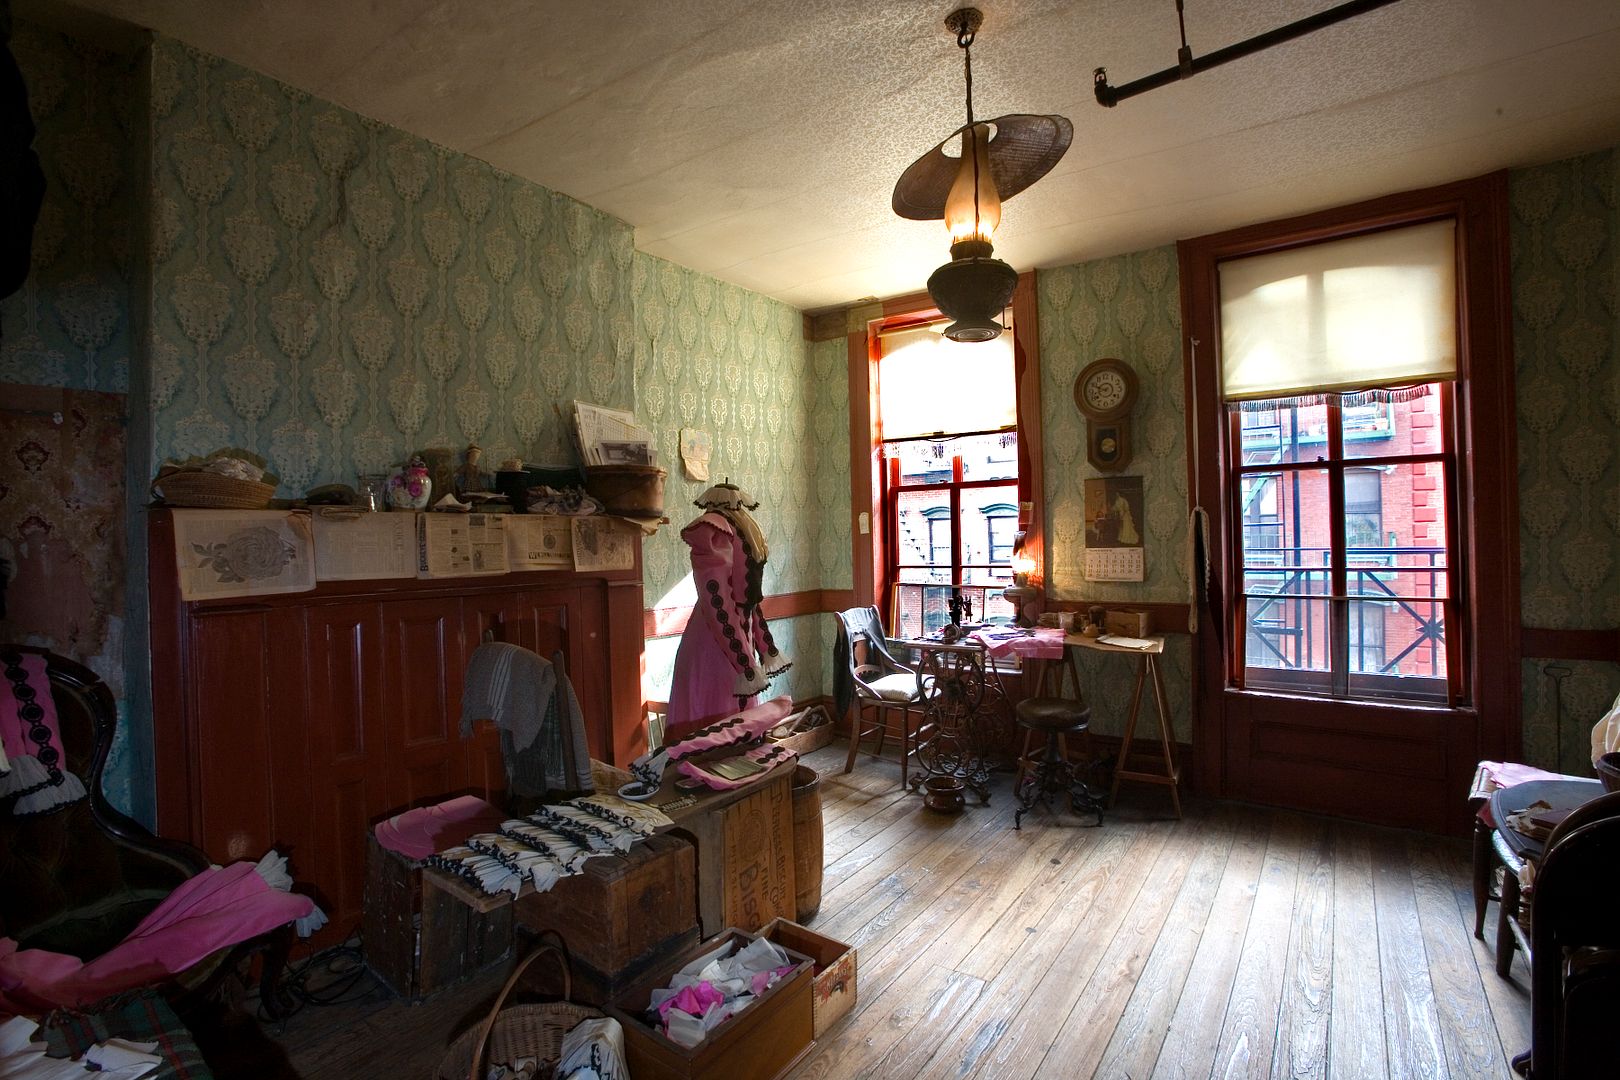 The Lower East Side Tenement Museum: Must-see in NYC